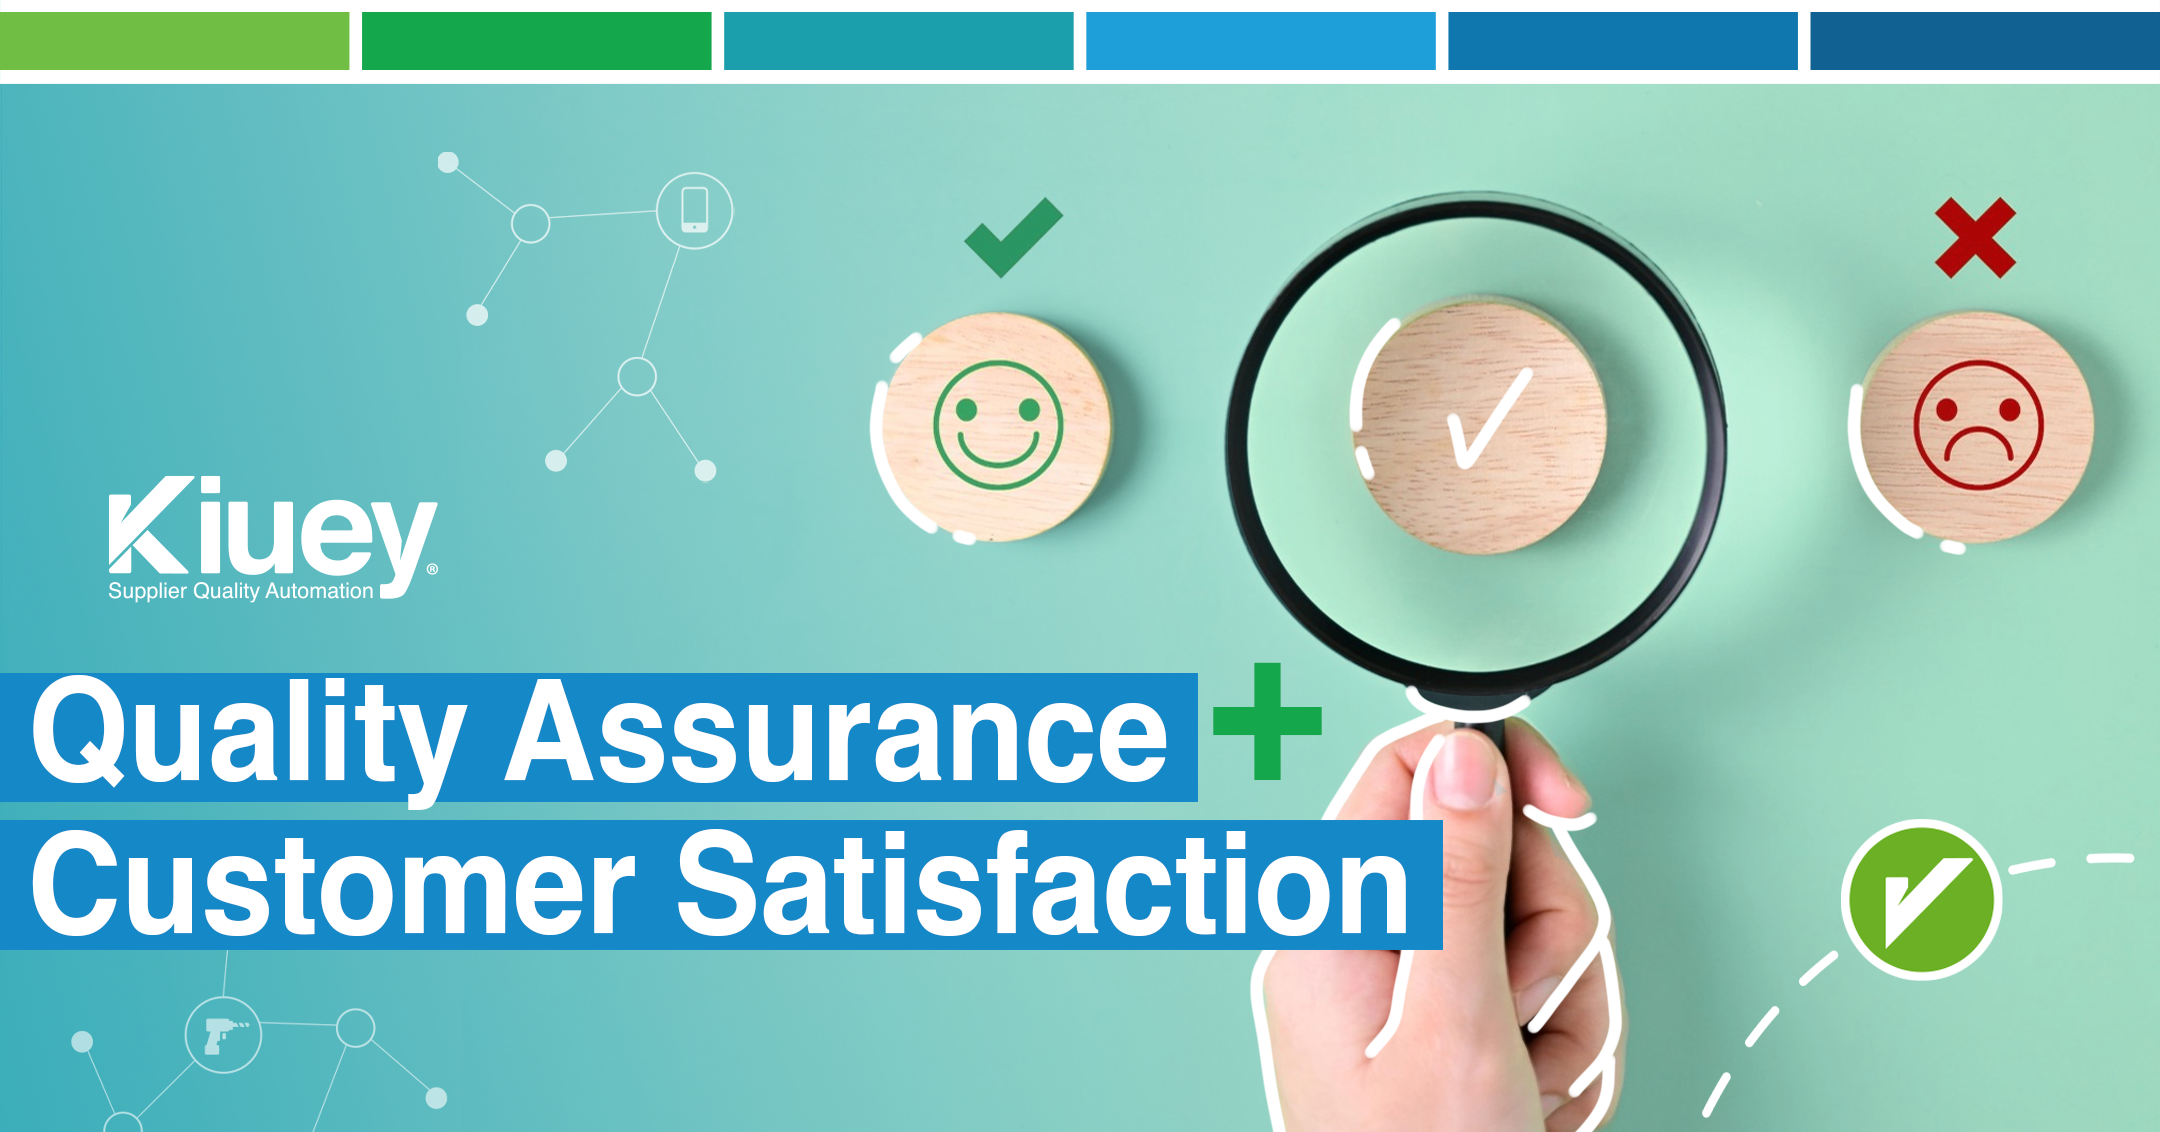 Linking Quality Assurance to Customer Satisfaction in Manufacturing